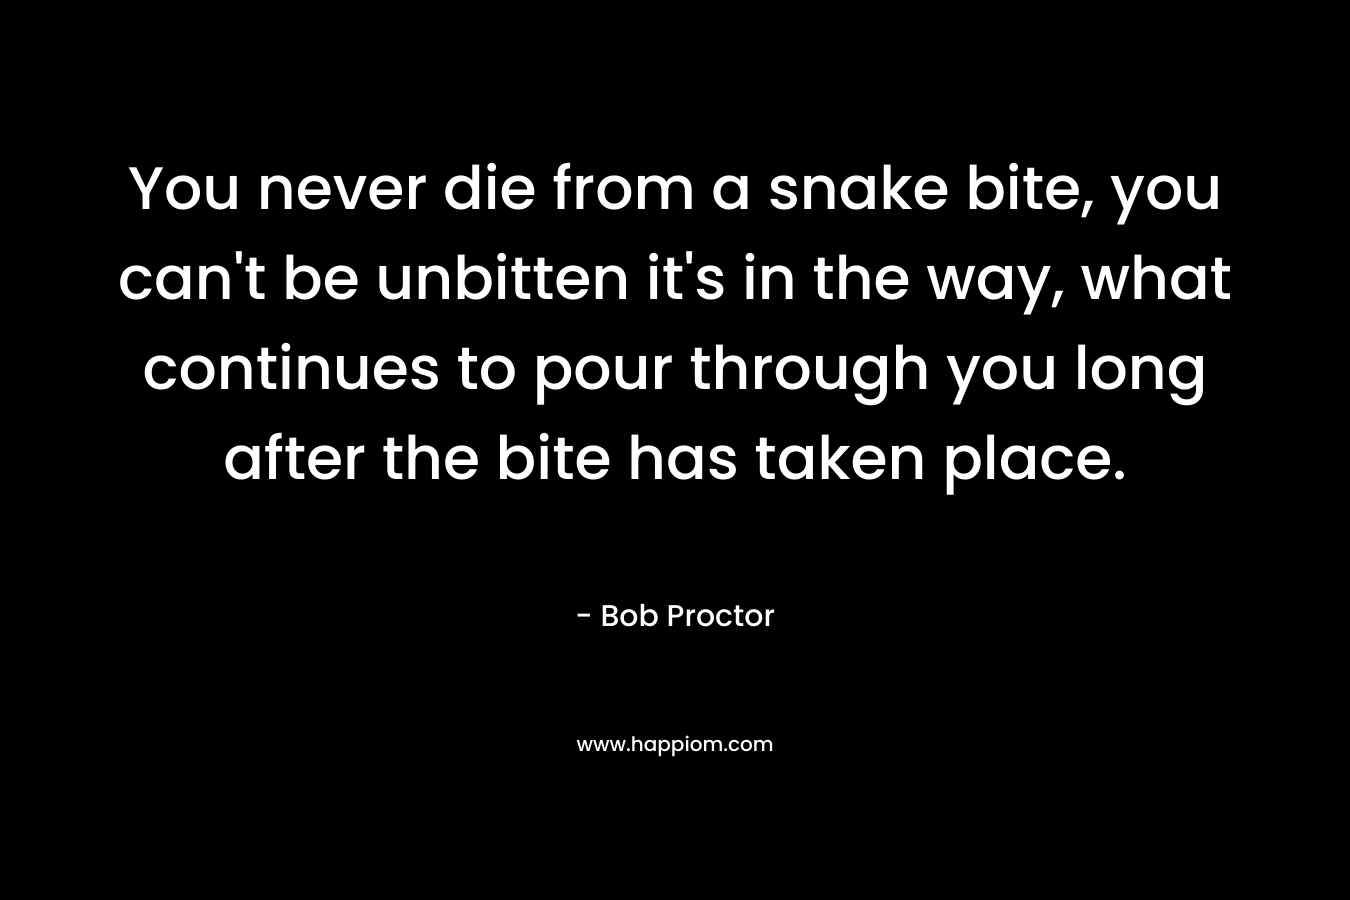 You never die from a snake bite, you can’t be unbitten it’s in the way, what continues to pour through you long after the bite has taken place. – Bob Proctor